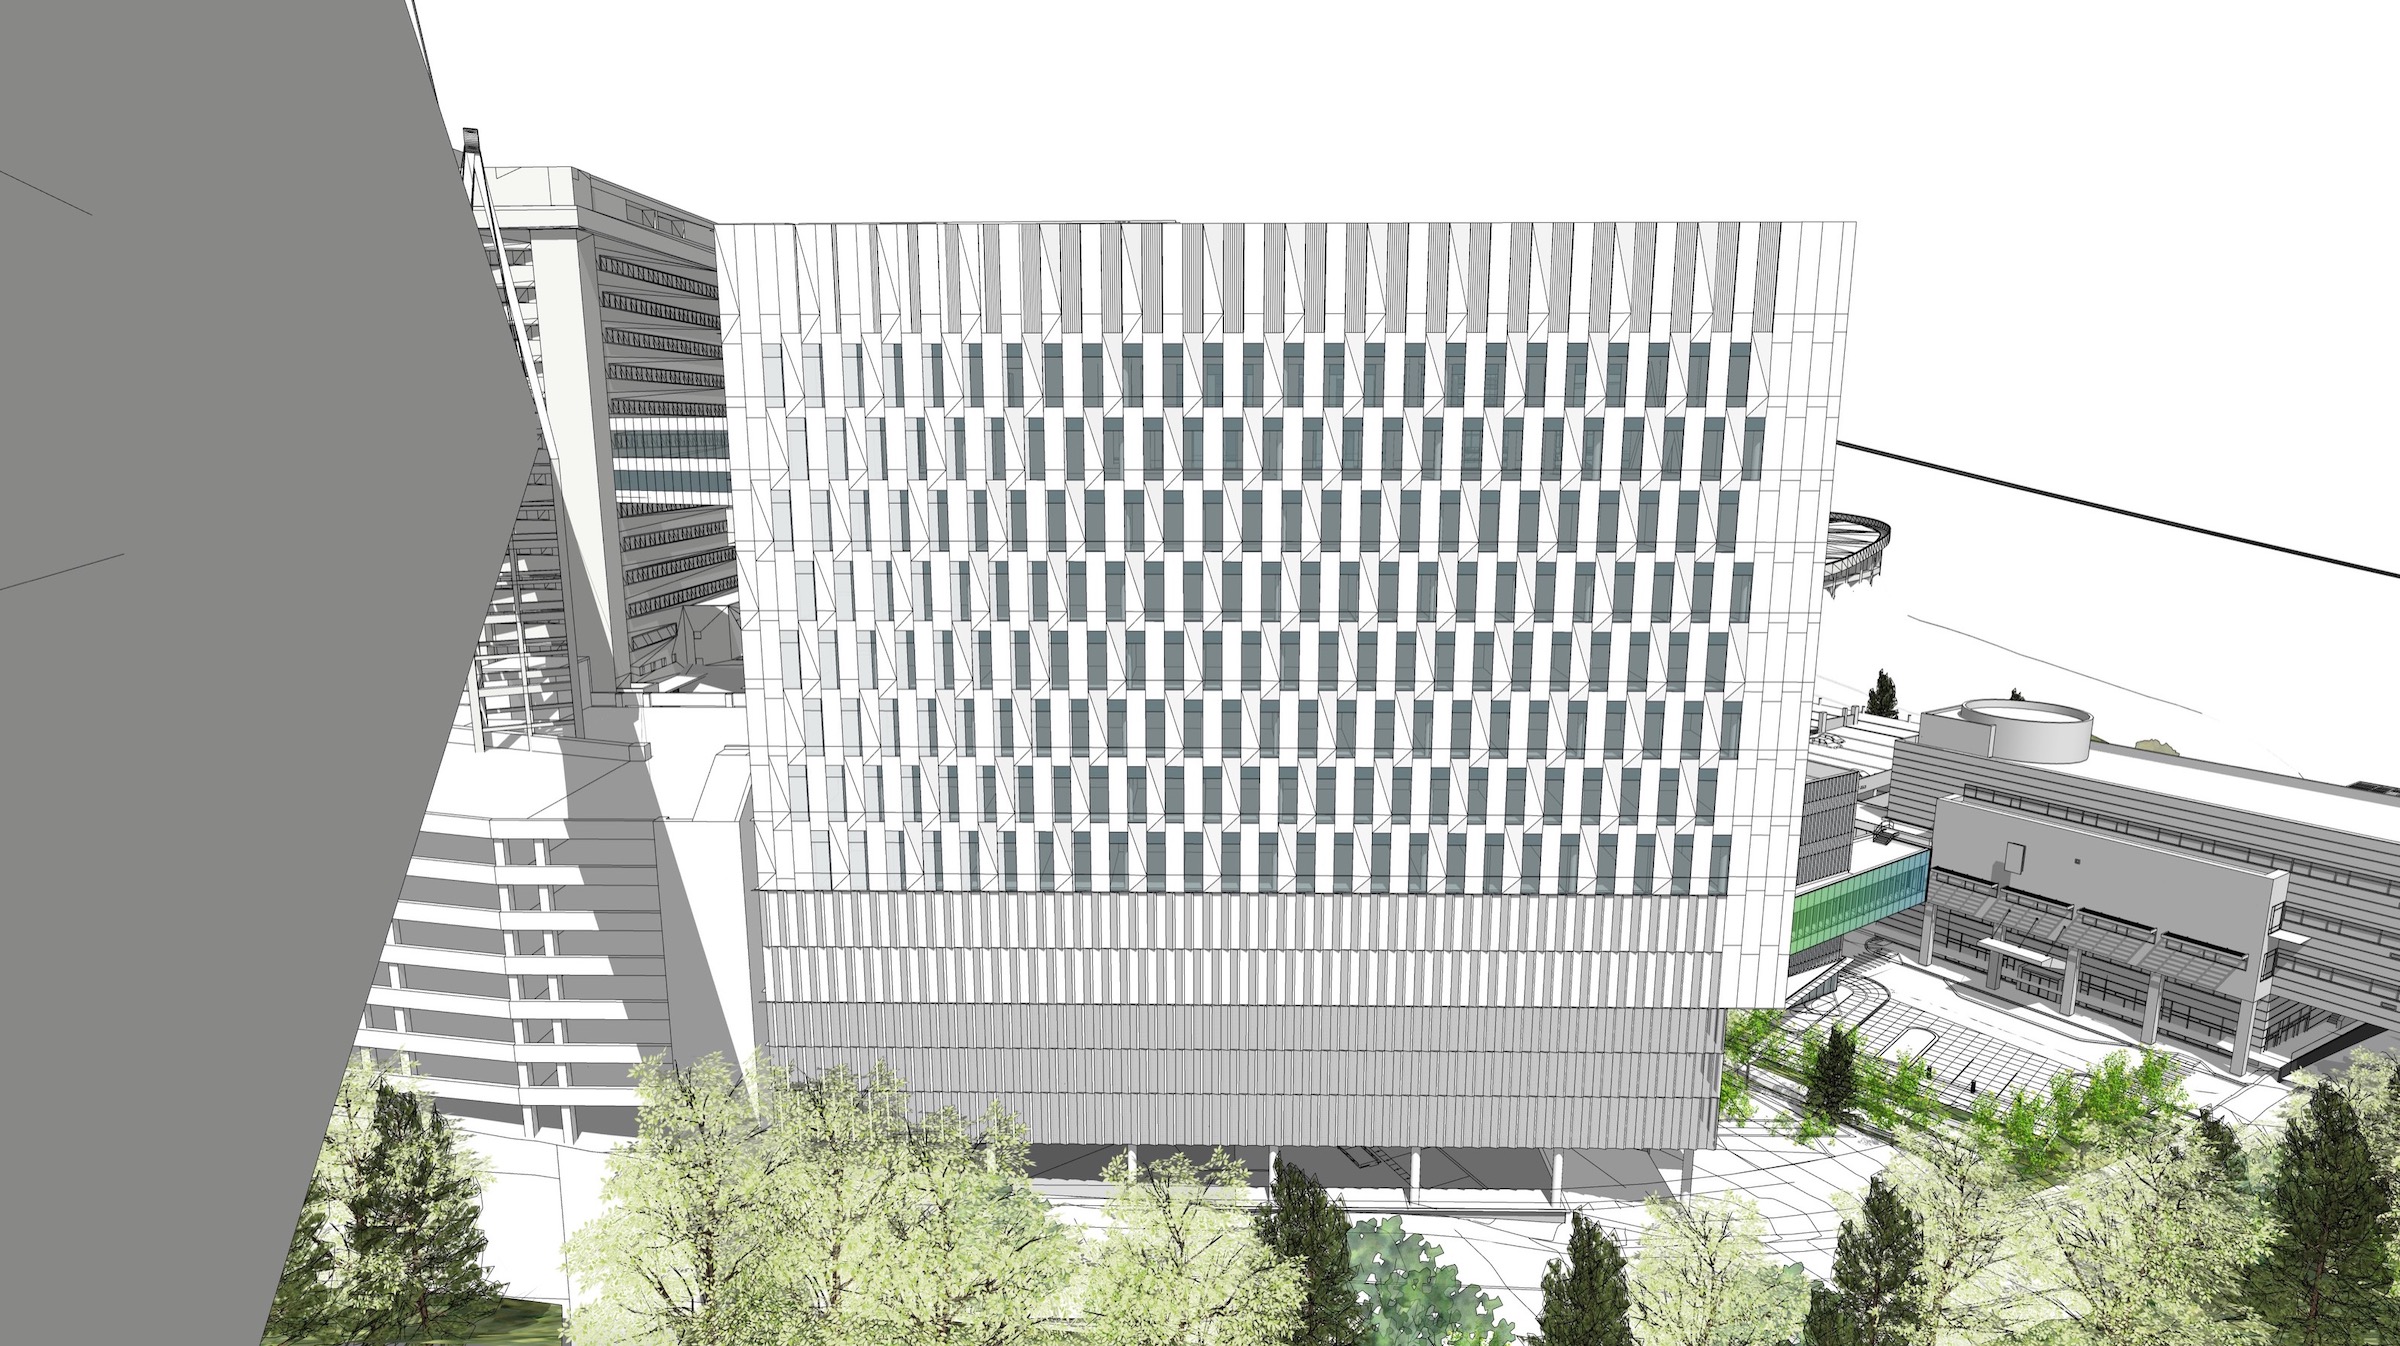 OHSU Hospital Expansion Presented to Design Commission